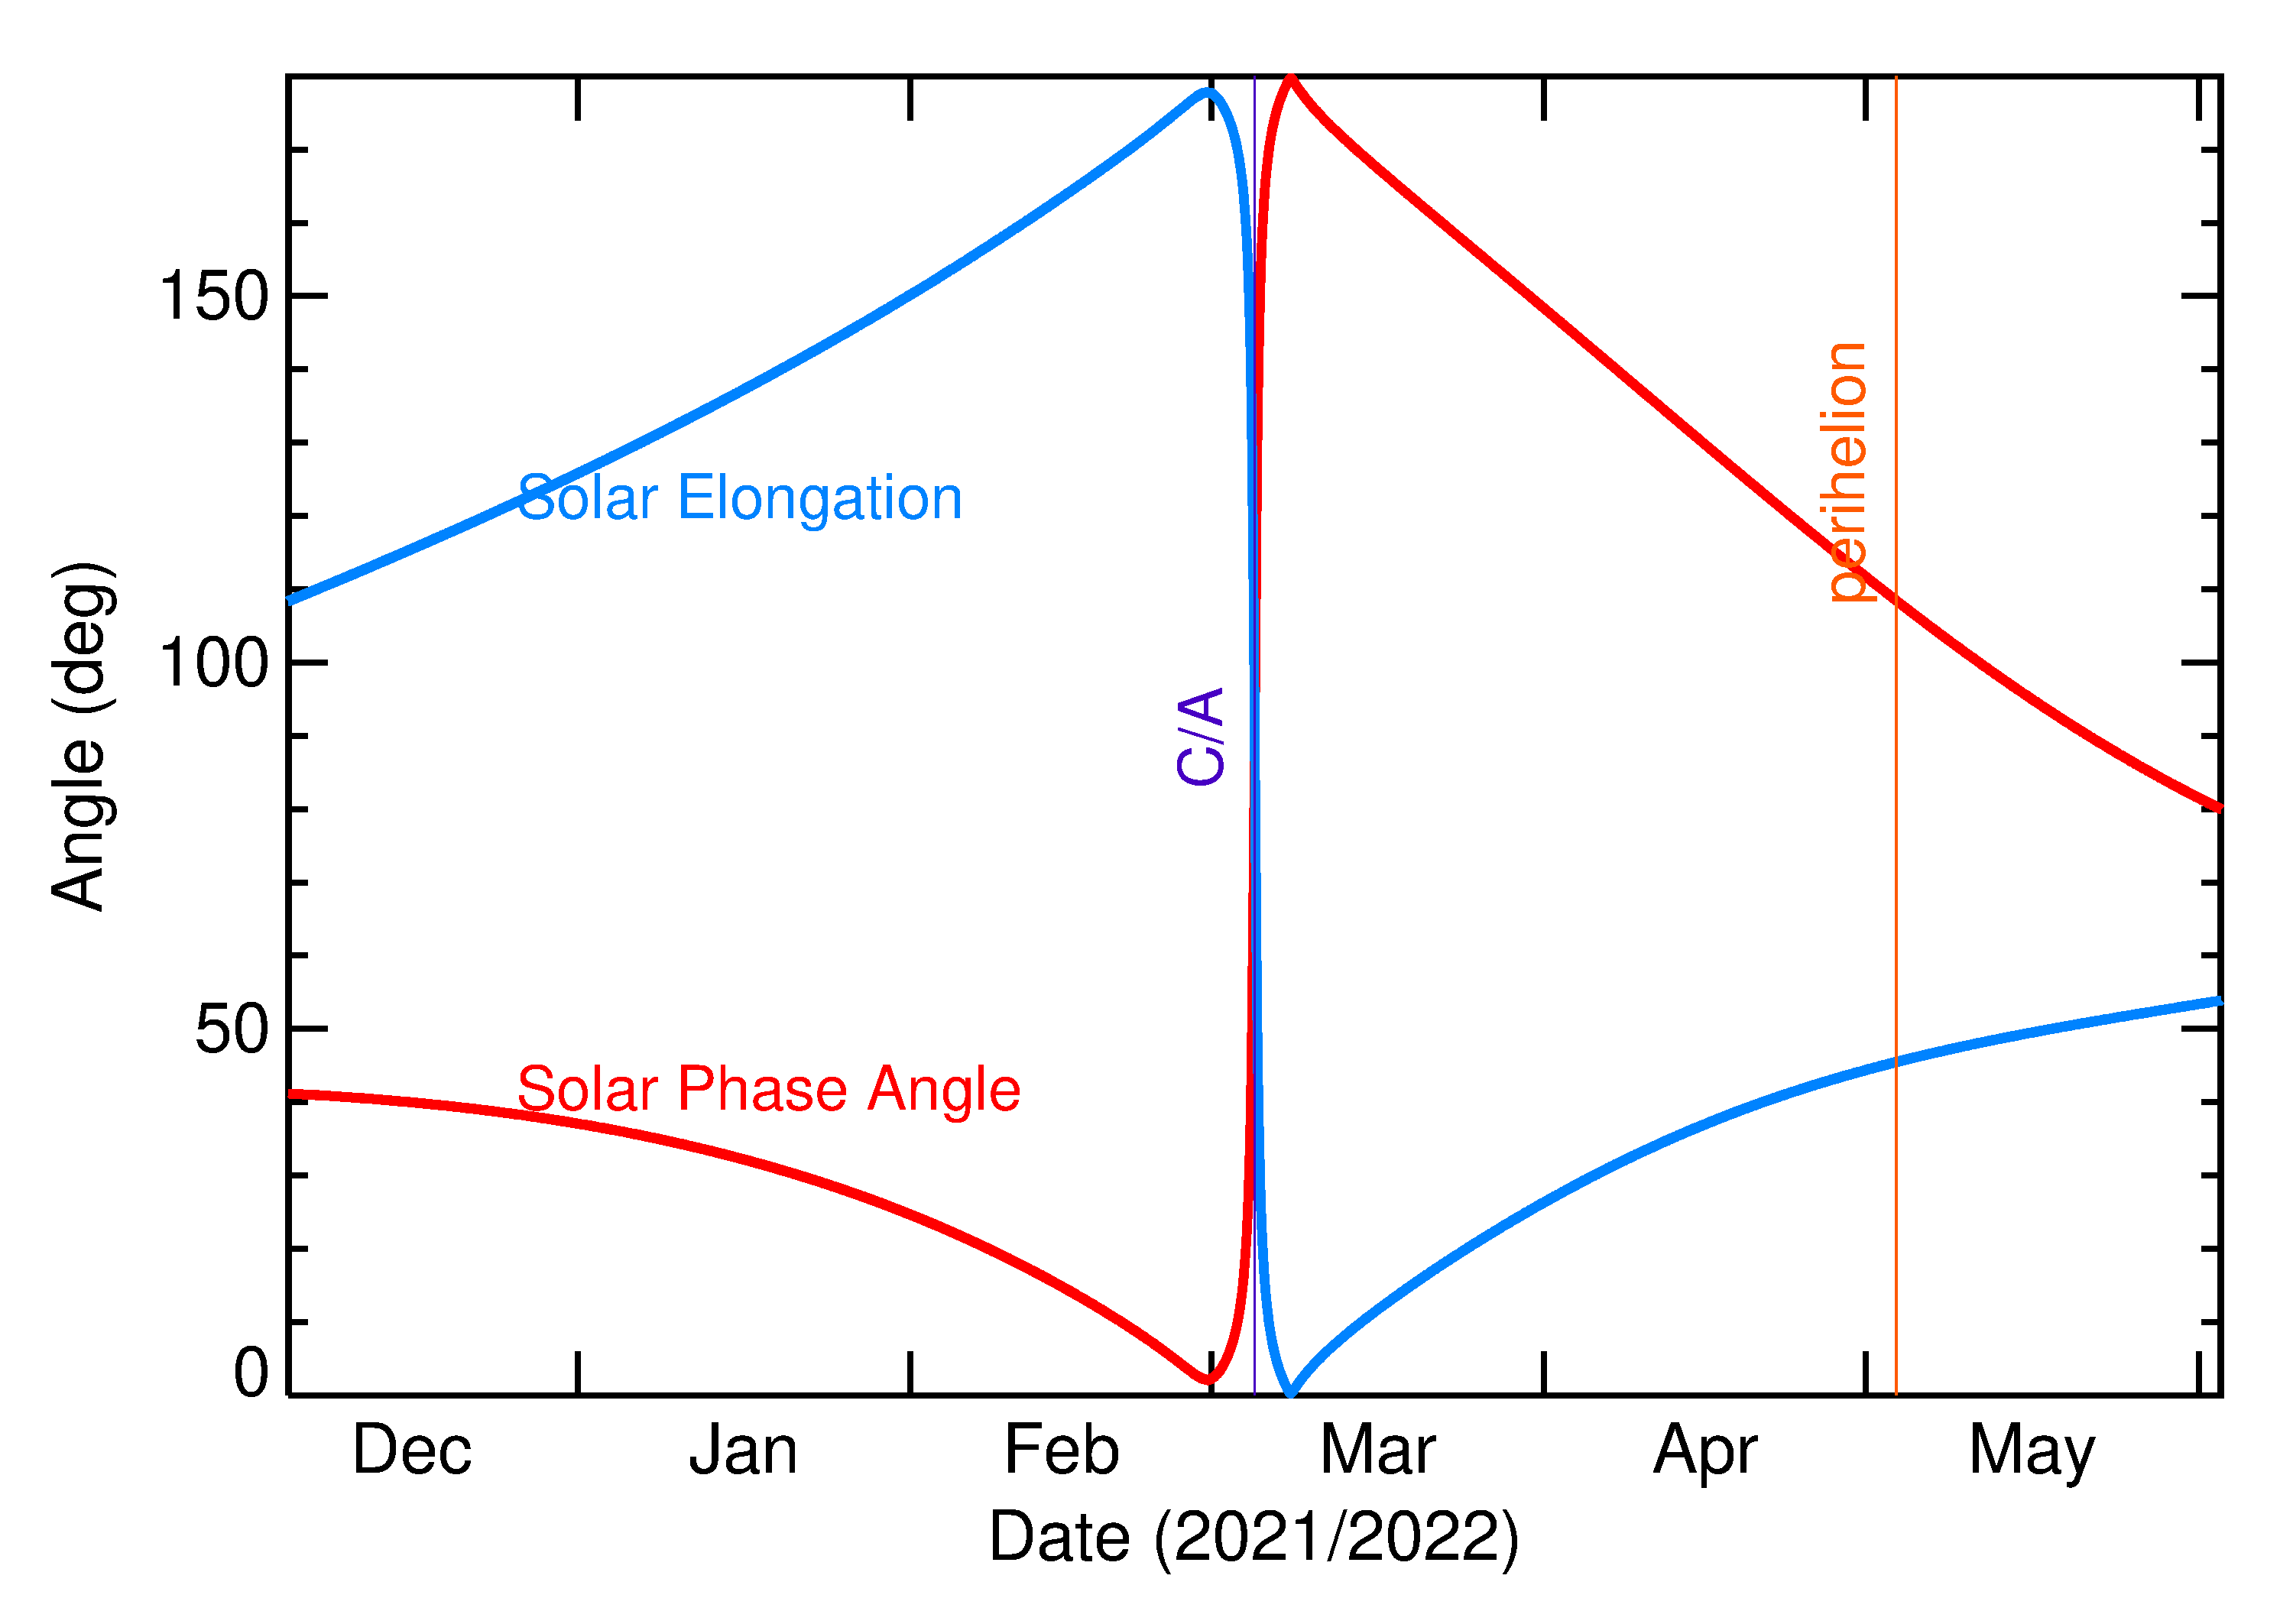 Solar Elongation and Solar Phase Angle of 2022 EF1 in the months around closest approach